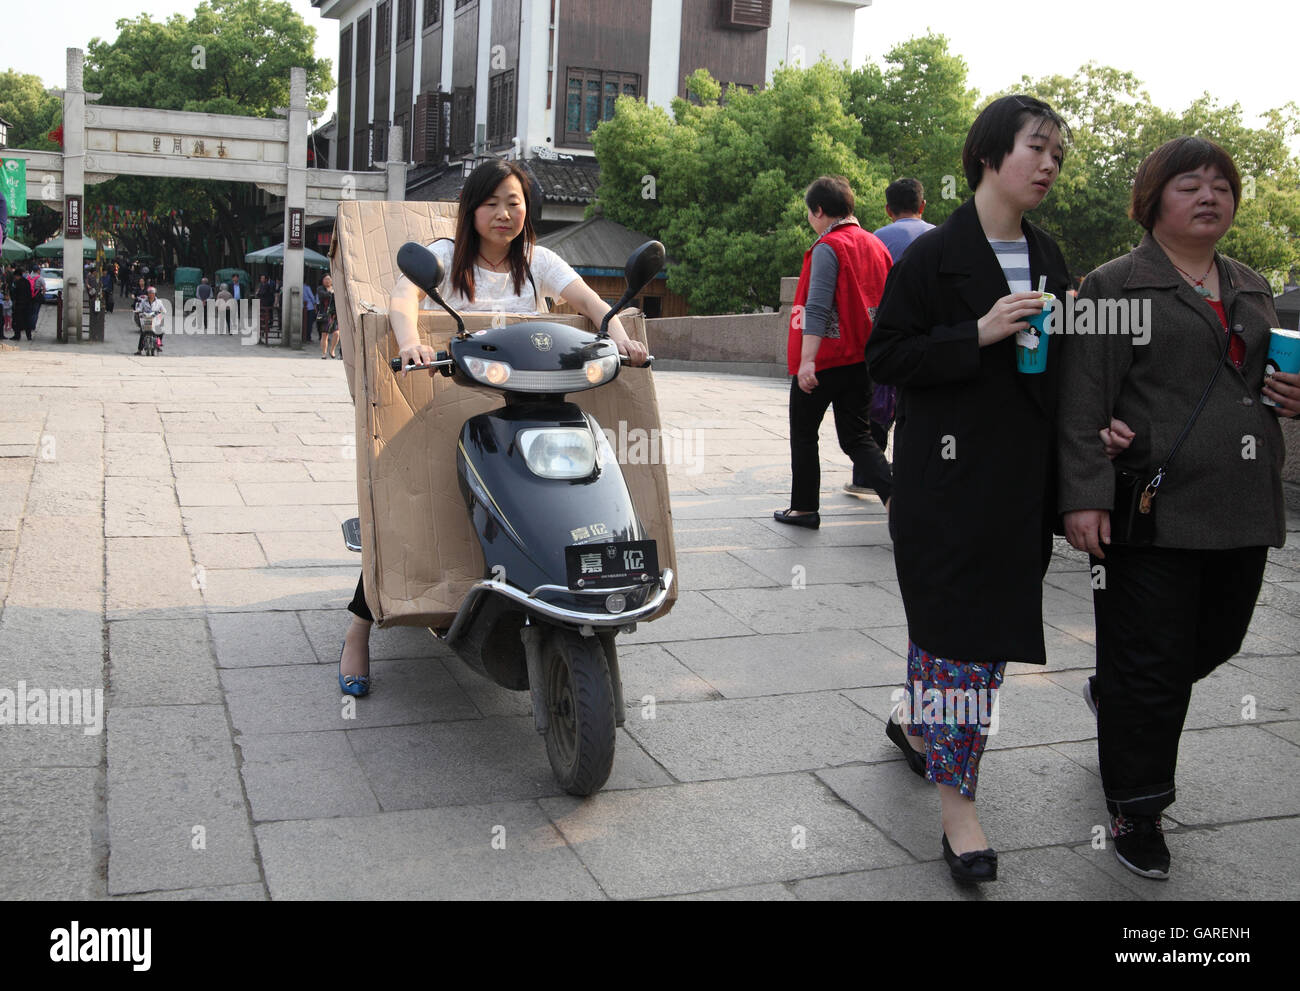 A Chinese woman rides a scooter transporting huge packages she carries in front of her and in the back, other people walk around. Tongli, China. Stock Photo